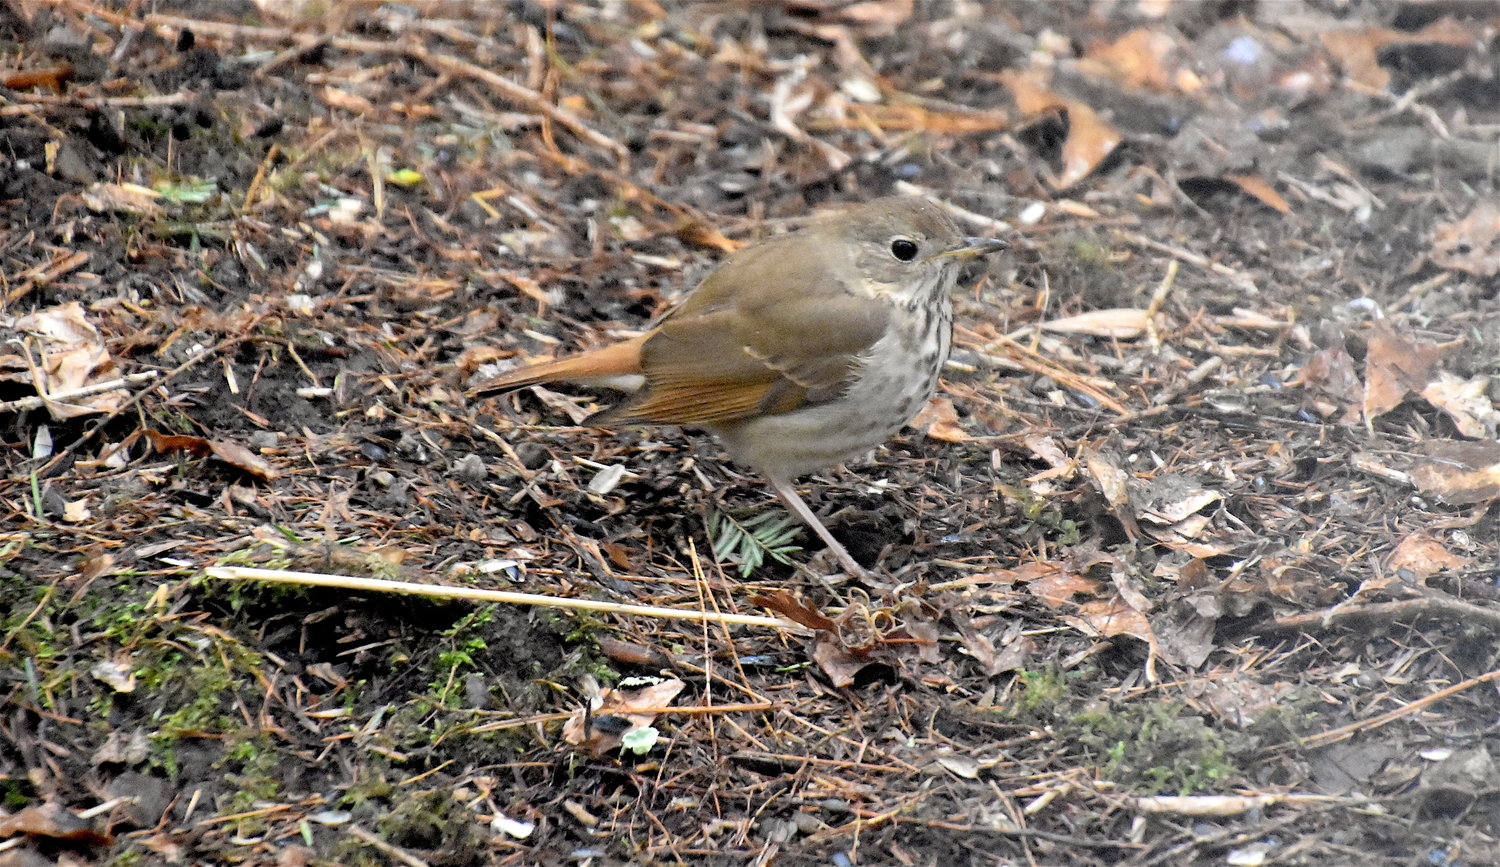 The hermit thrush is a round-bodied brownish bird with a notably reddish tail and thin white eye-ring. Its throat is mottled with spots that fade to smudges on its pale underside.